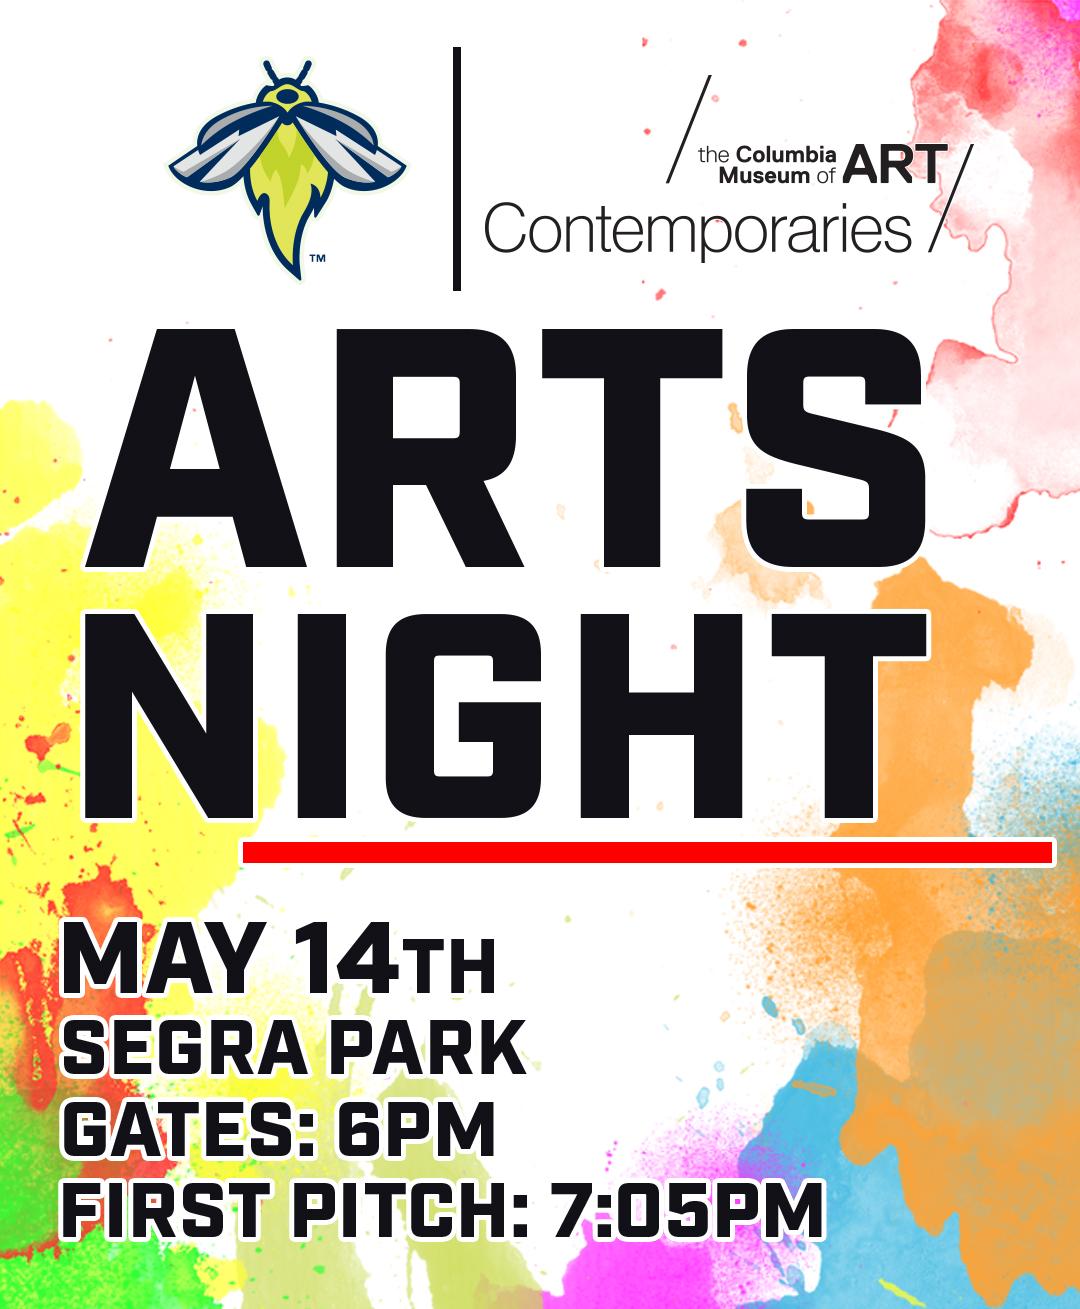 The words "Arts Night" over a watercolor-painted background